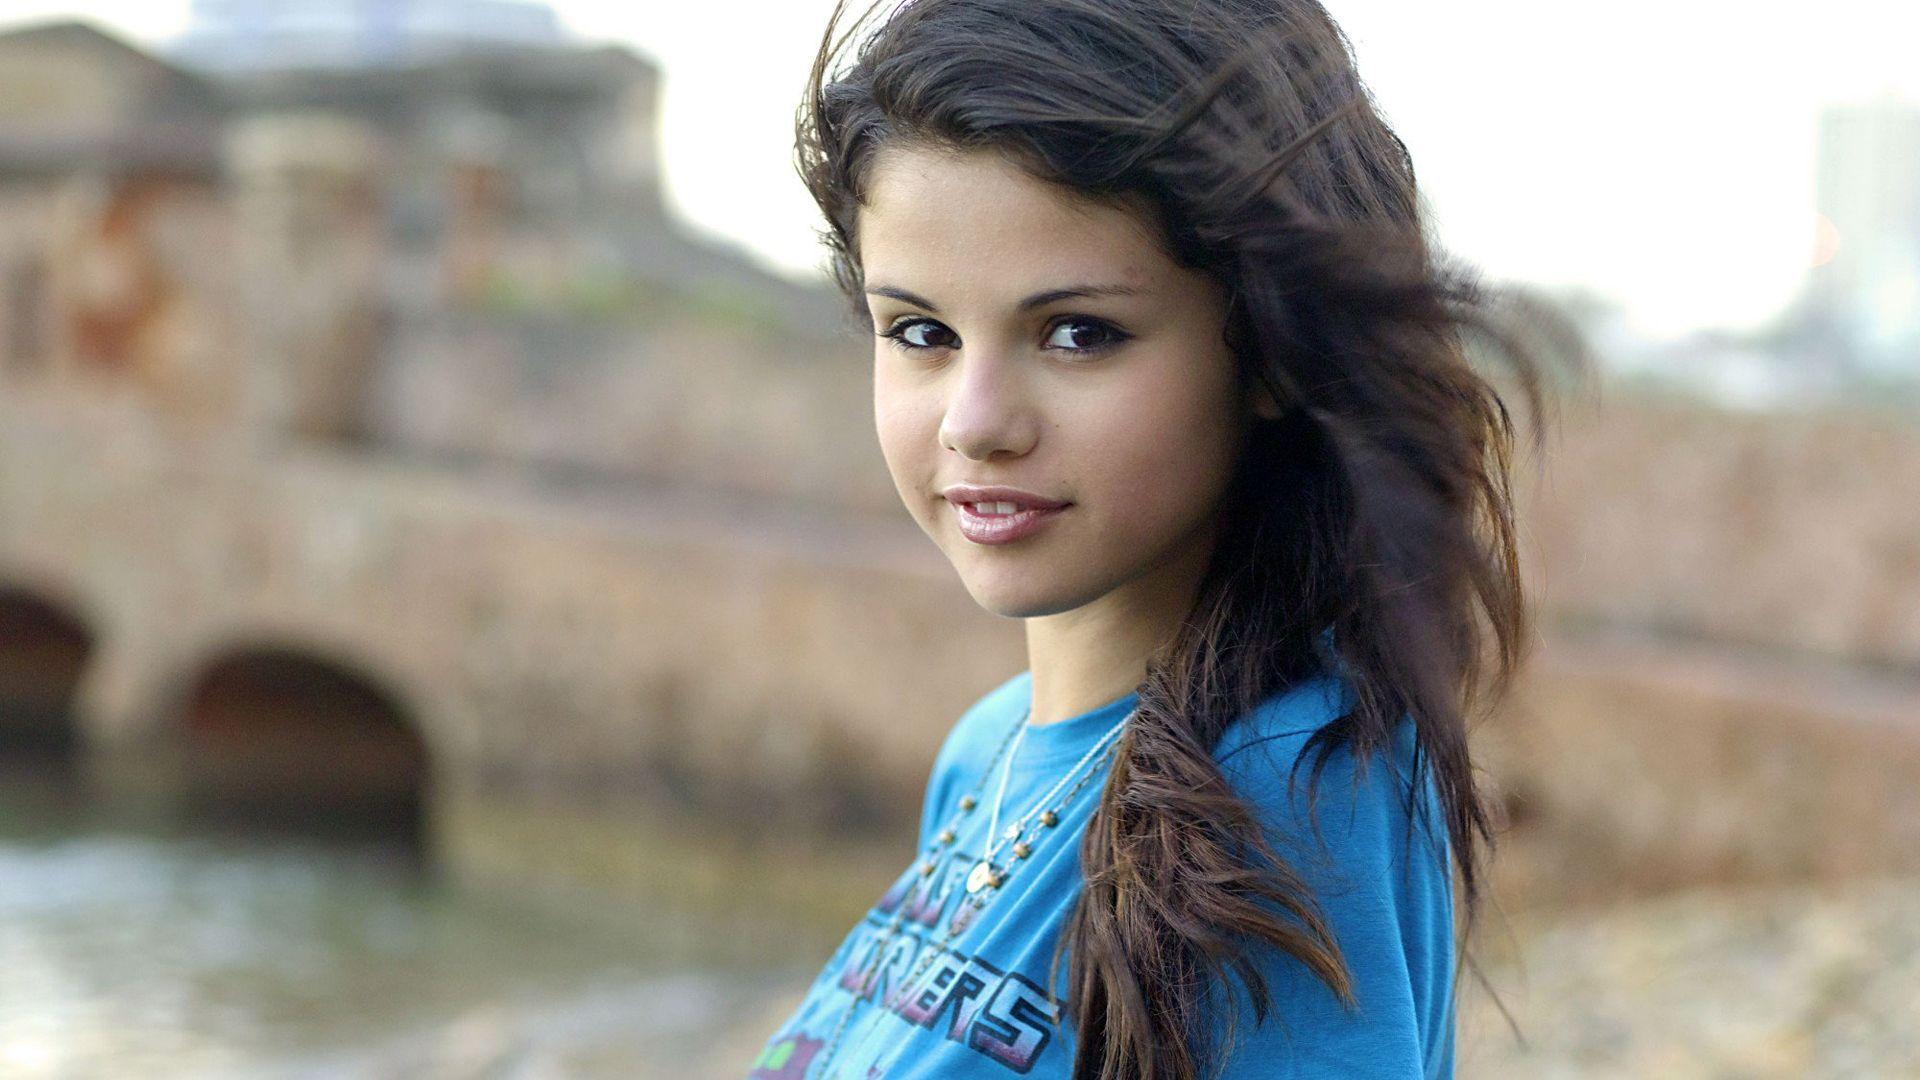 Selena Gomez Cool HD Wallpaper Picture on ScreenCrot